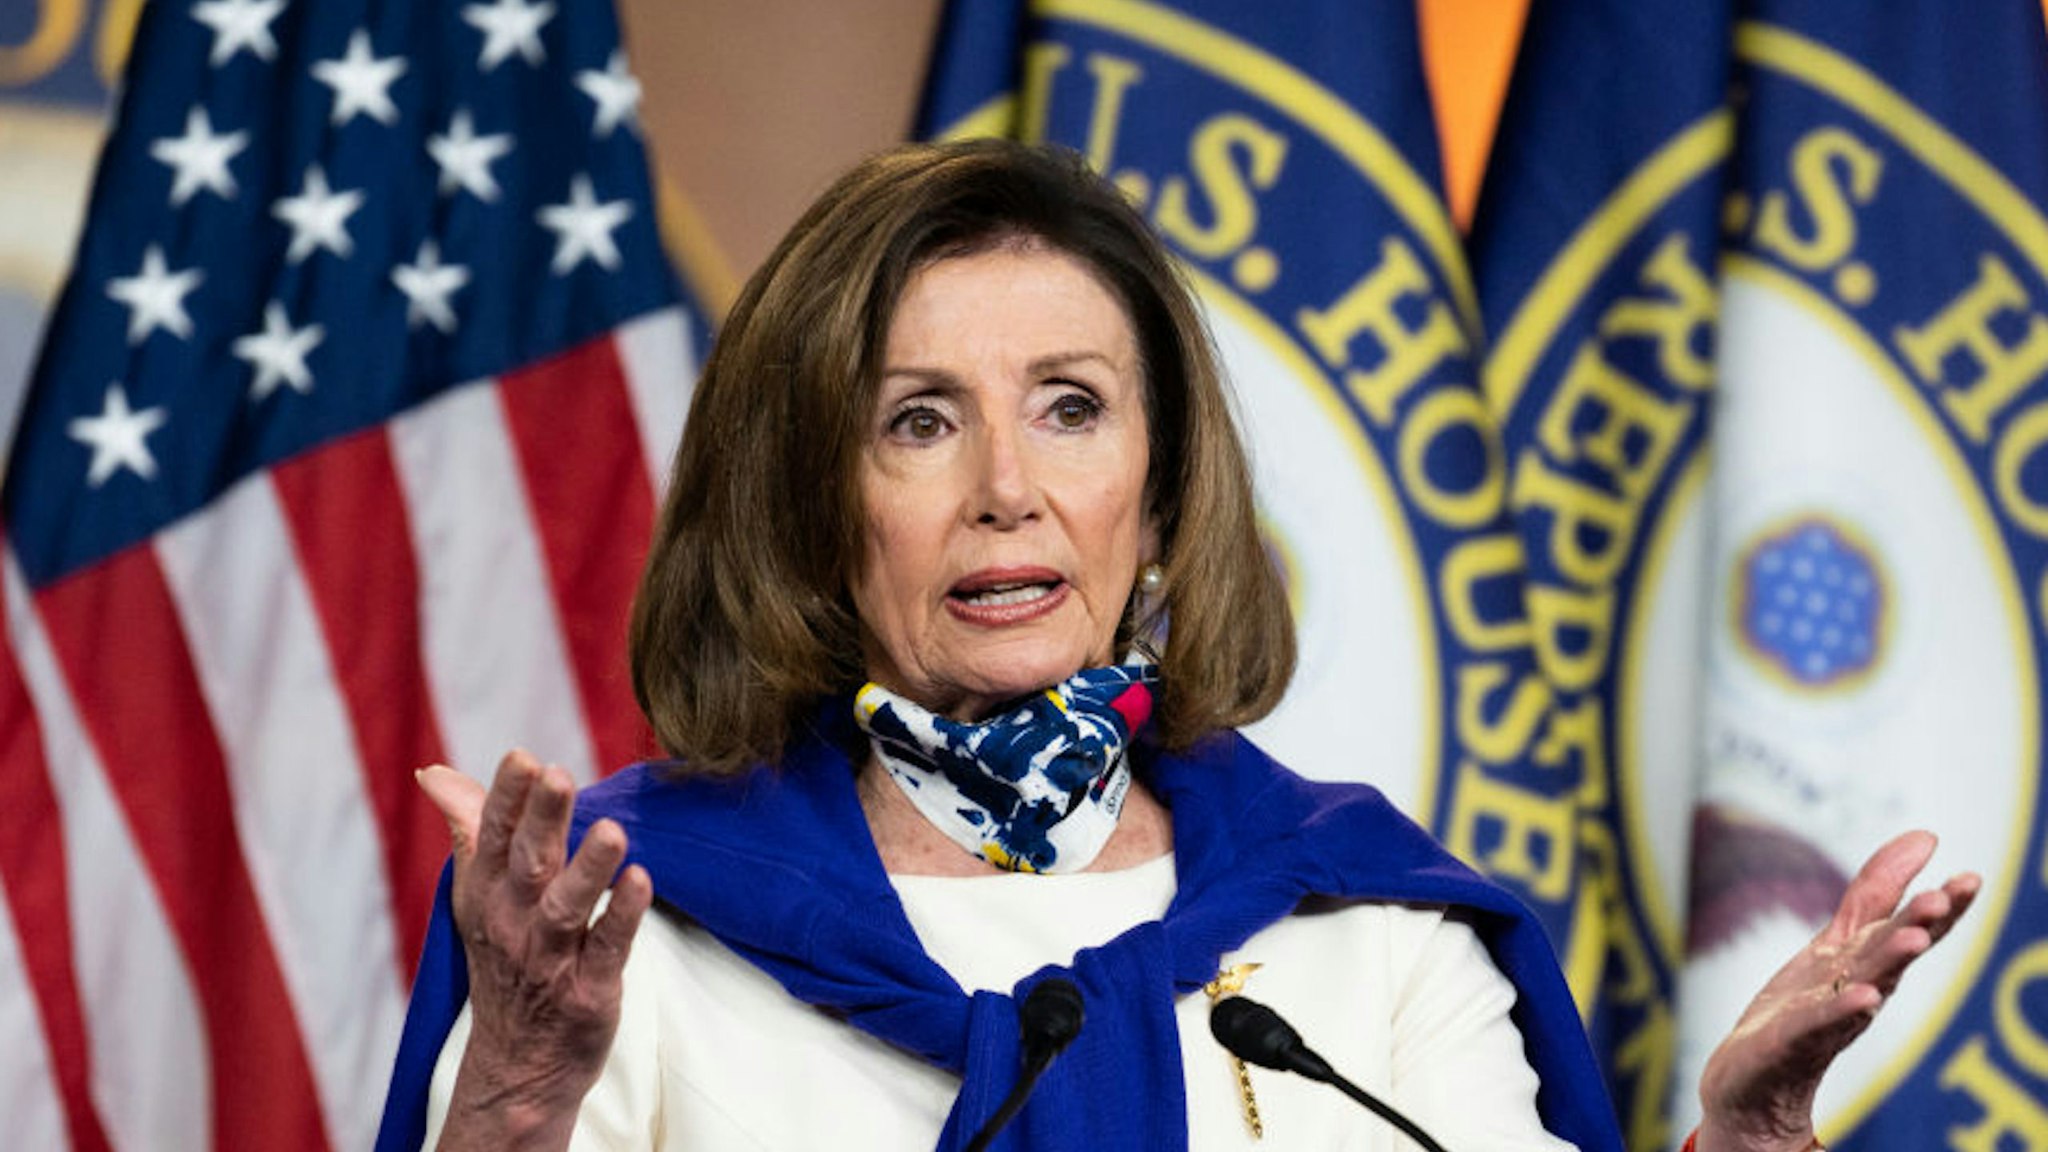 WASHINGTON, UNITED STATES - MAY 21, 2020: House Speaker, Nancy Pelosi (D-CA) speaking during a press event on the anniversary of House passage of the 19th amendment and the vote-by-mail and election security provisions included in The Heroes Act.